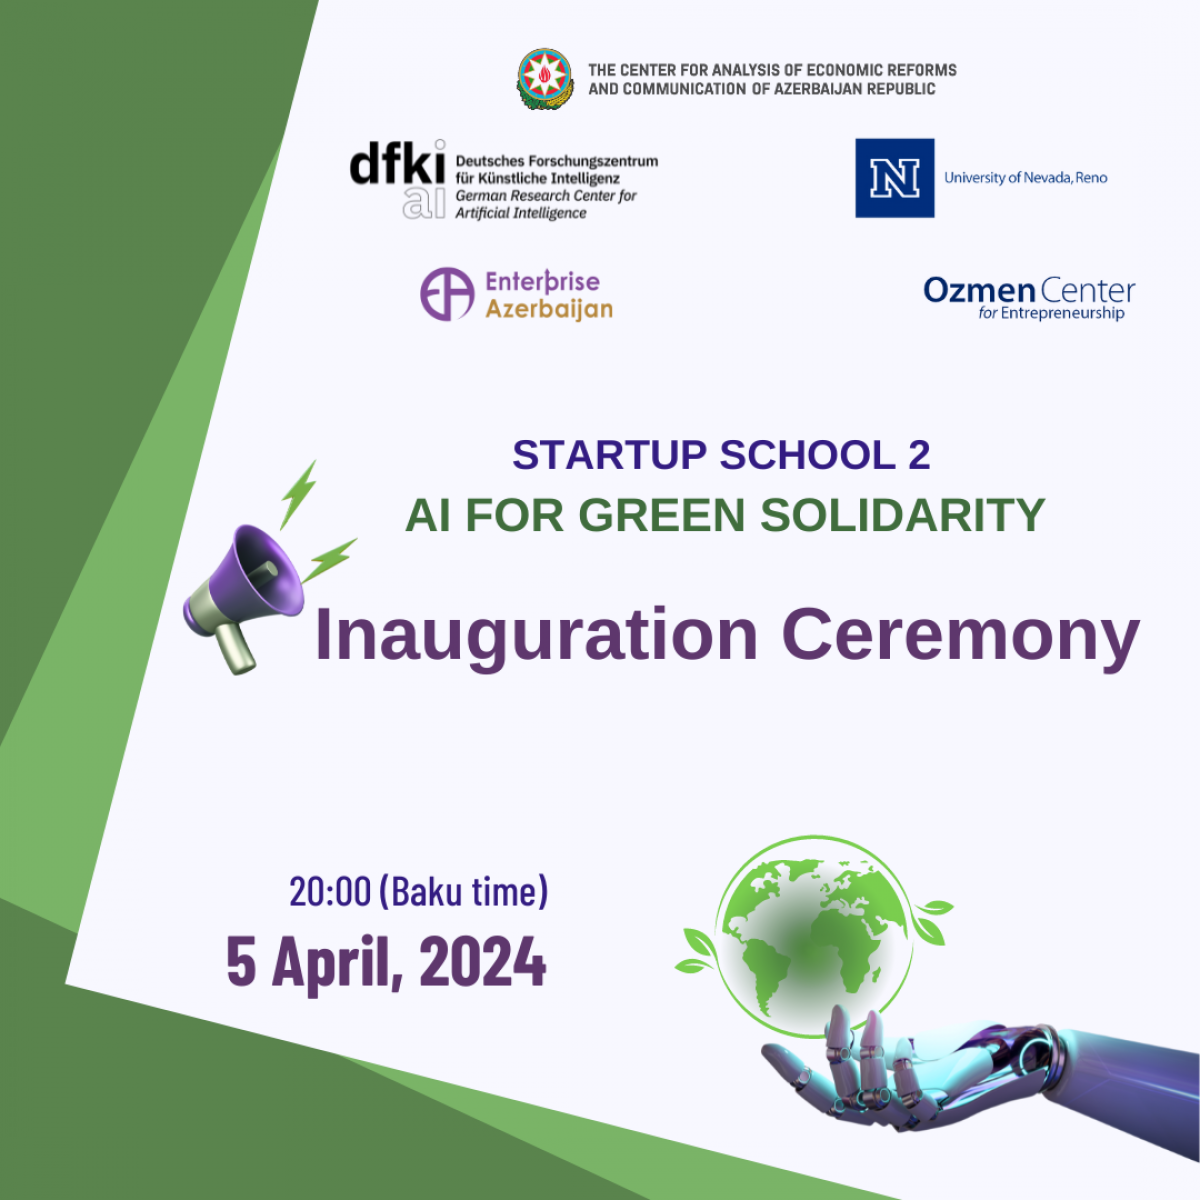 The official opening ceremony of "Startup School 2" will be held on April 5